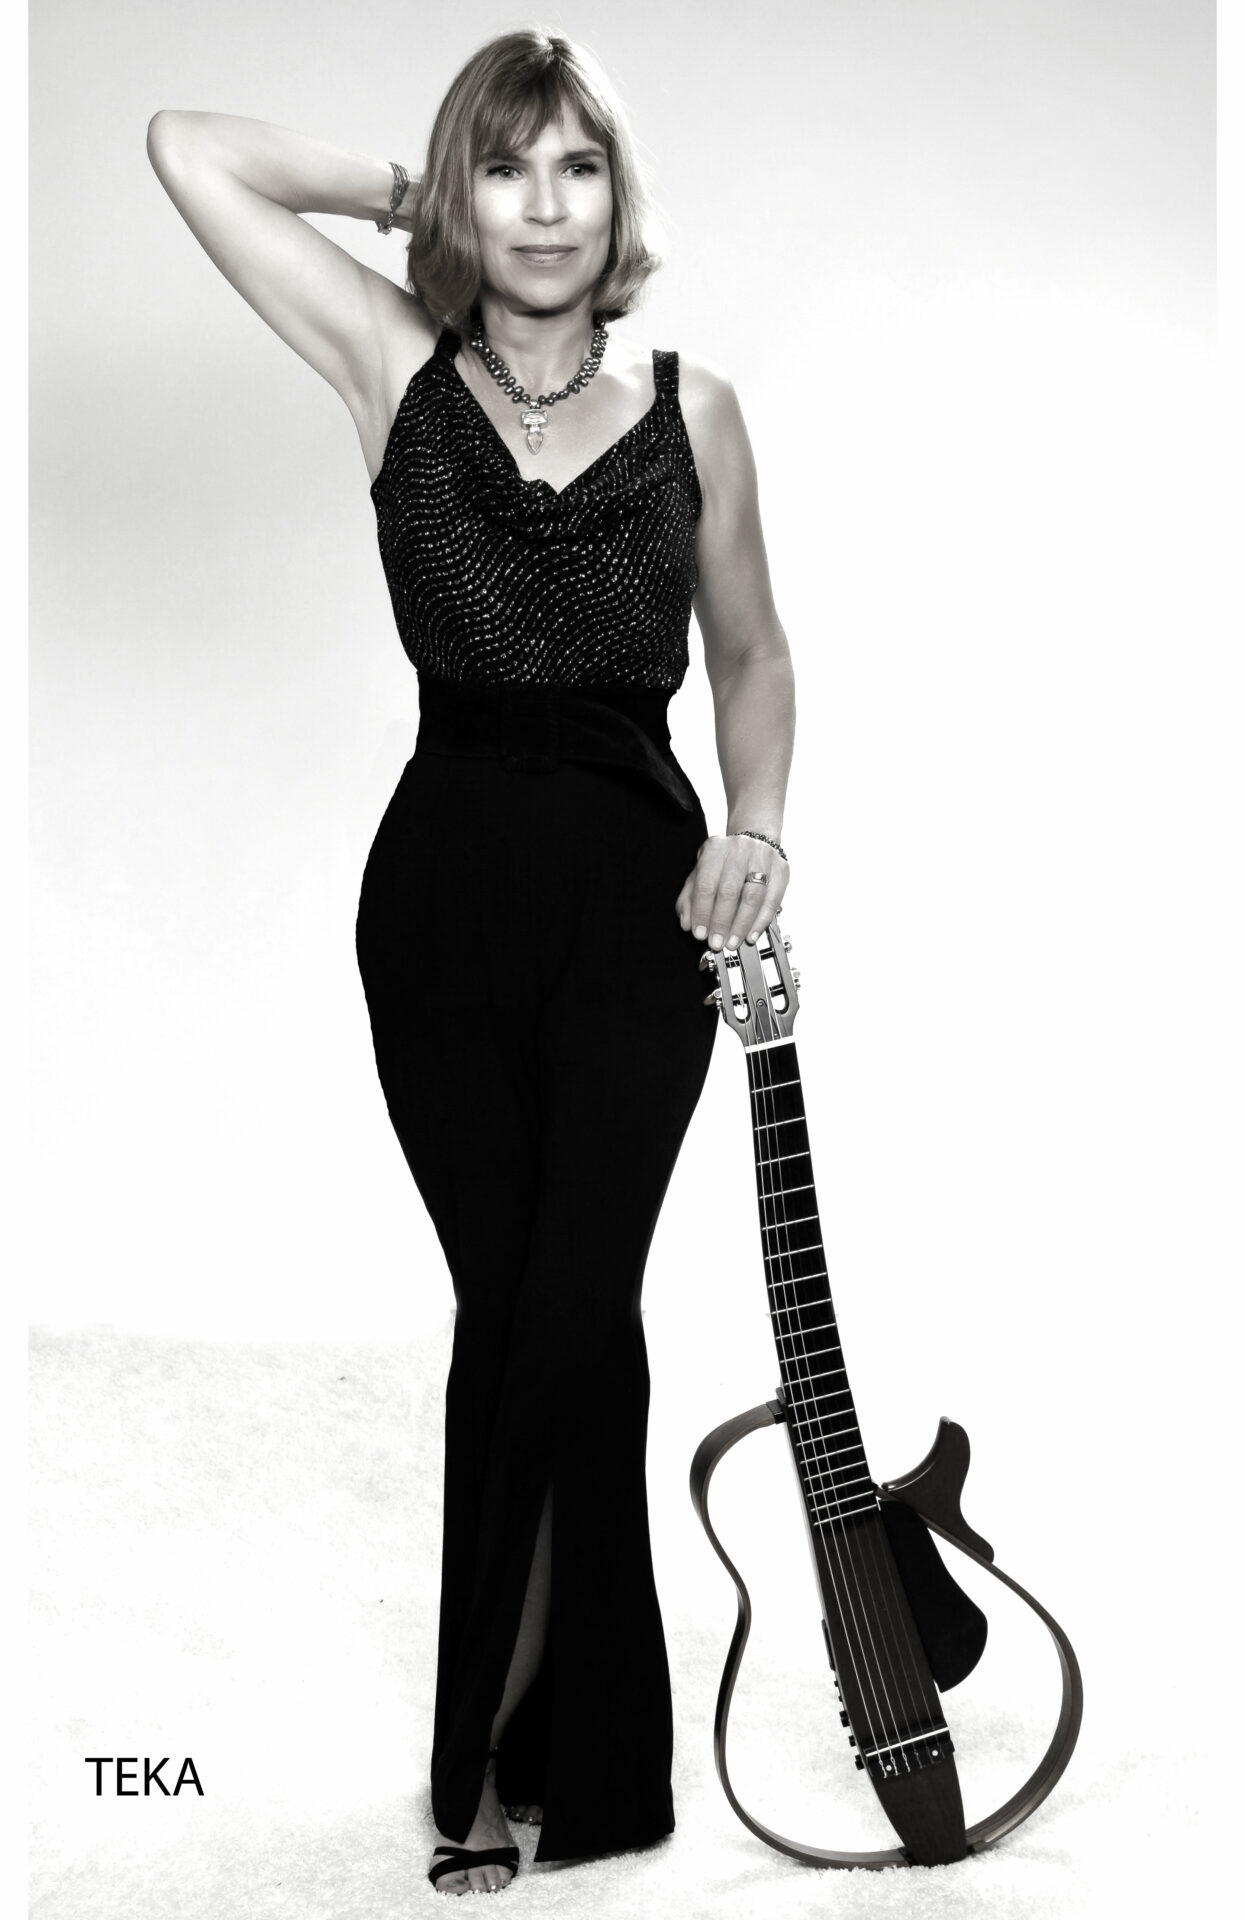 A black and white photo of a woman holding a guitar.